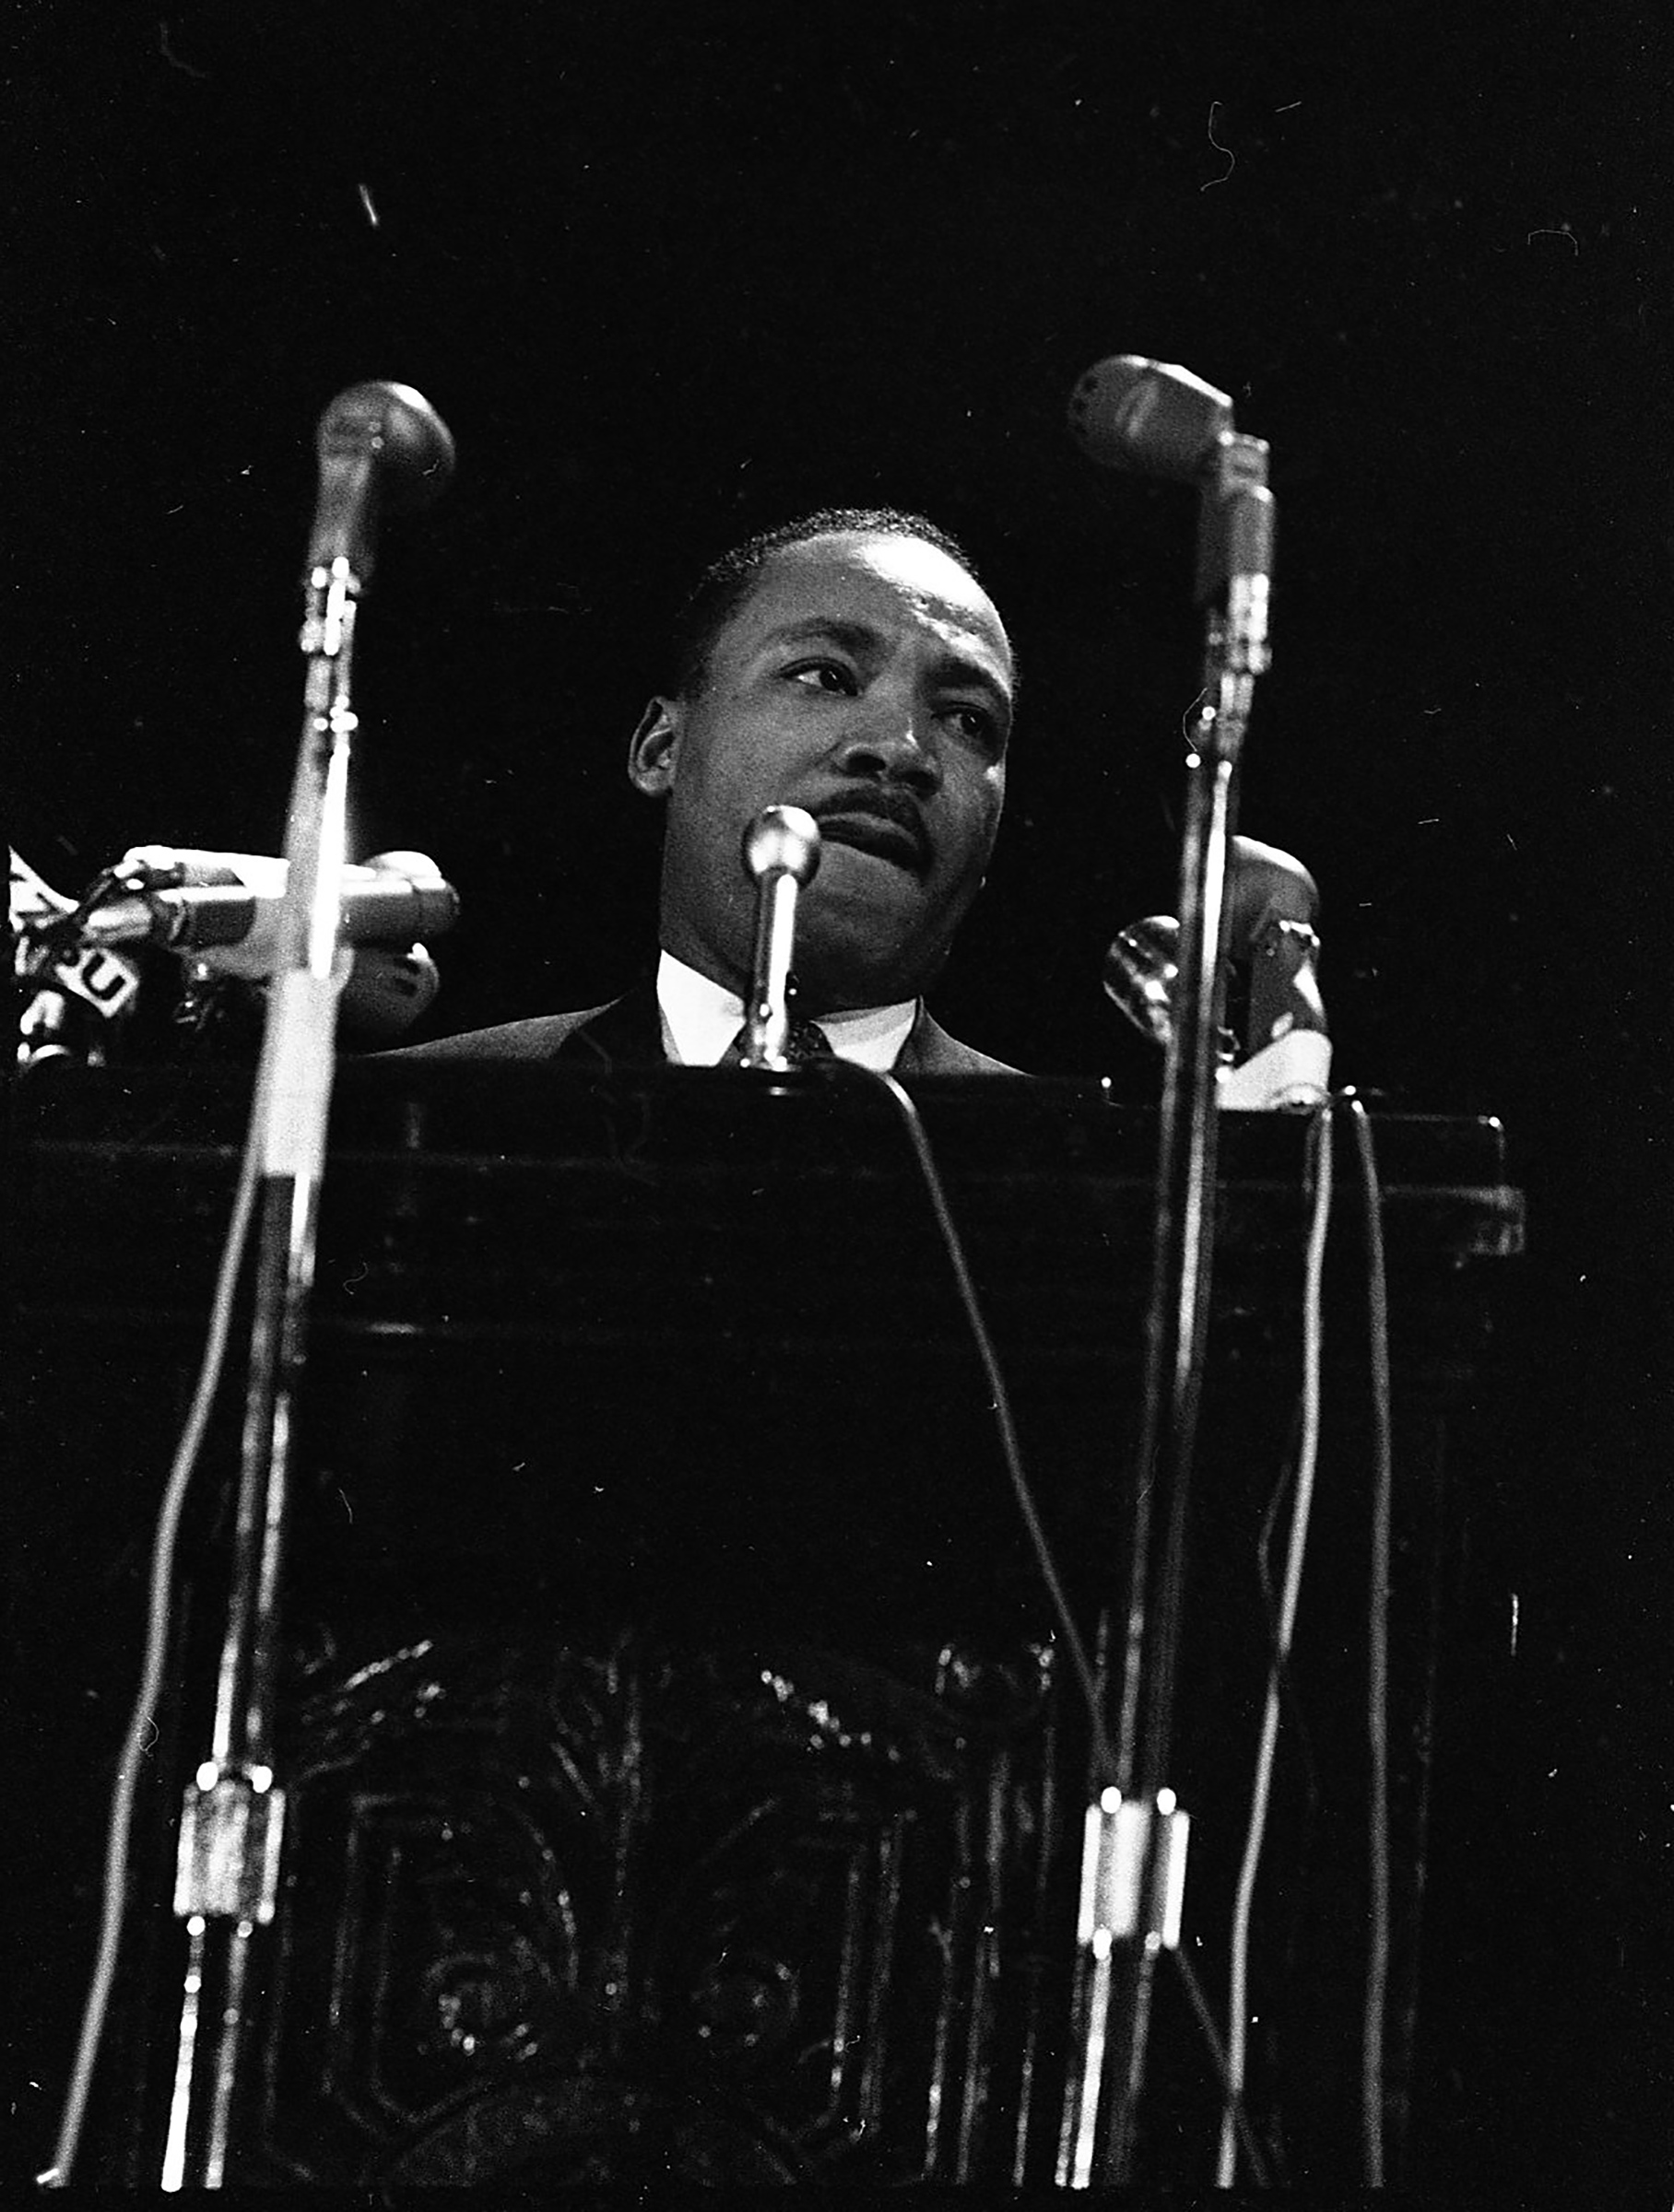 Dr. Martin Luther King Jr. delivers his "The Other America" speech at Stanford University in California, on April 14, 1967. (Jerry Telfer—San Francisco Chronicle/Getty Images)